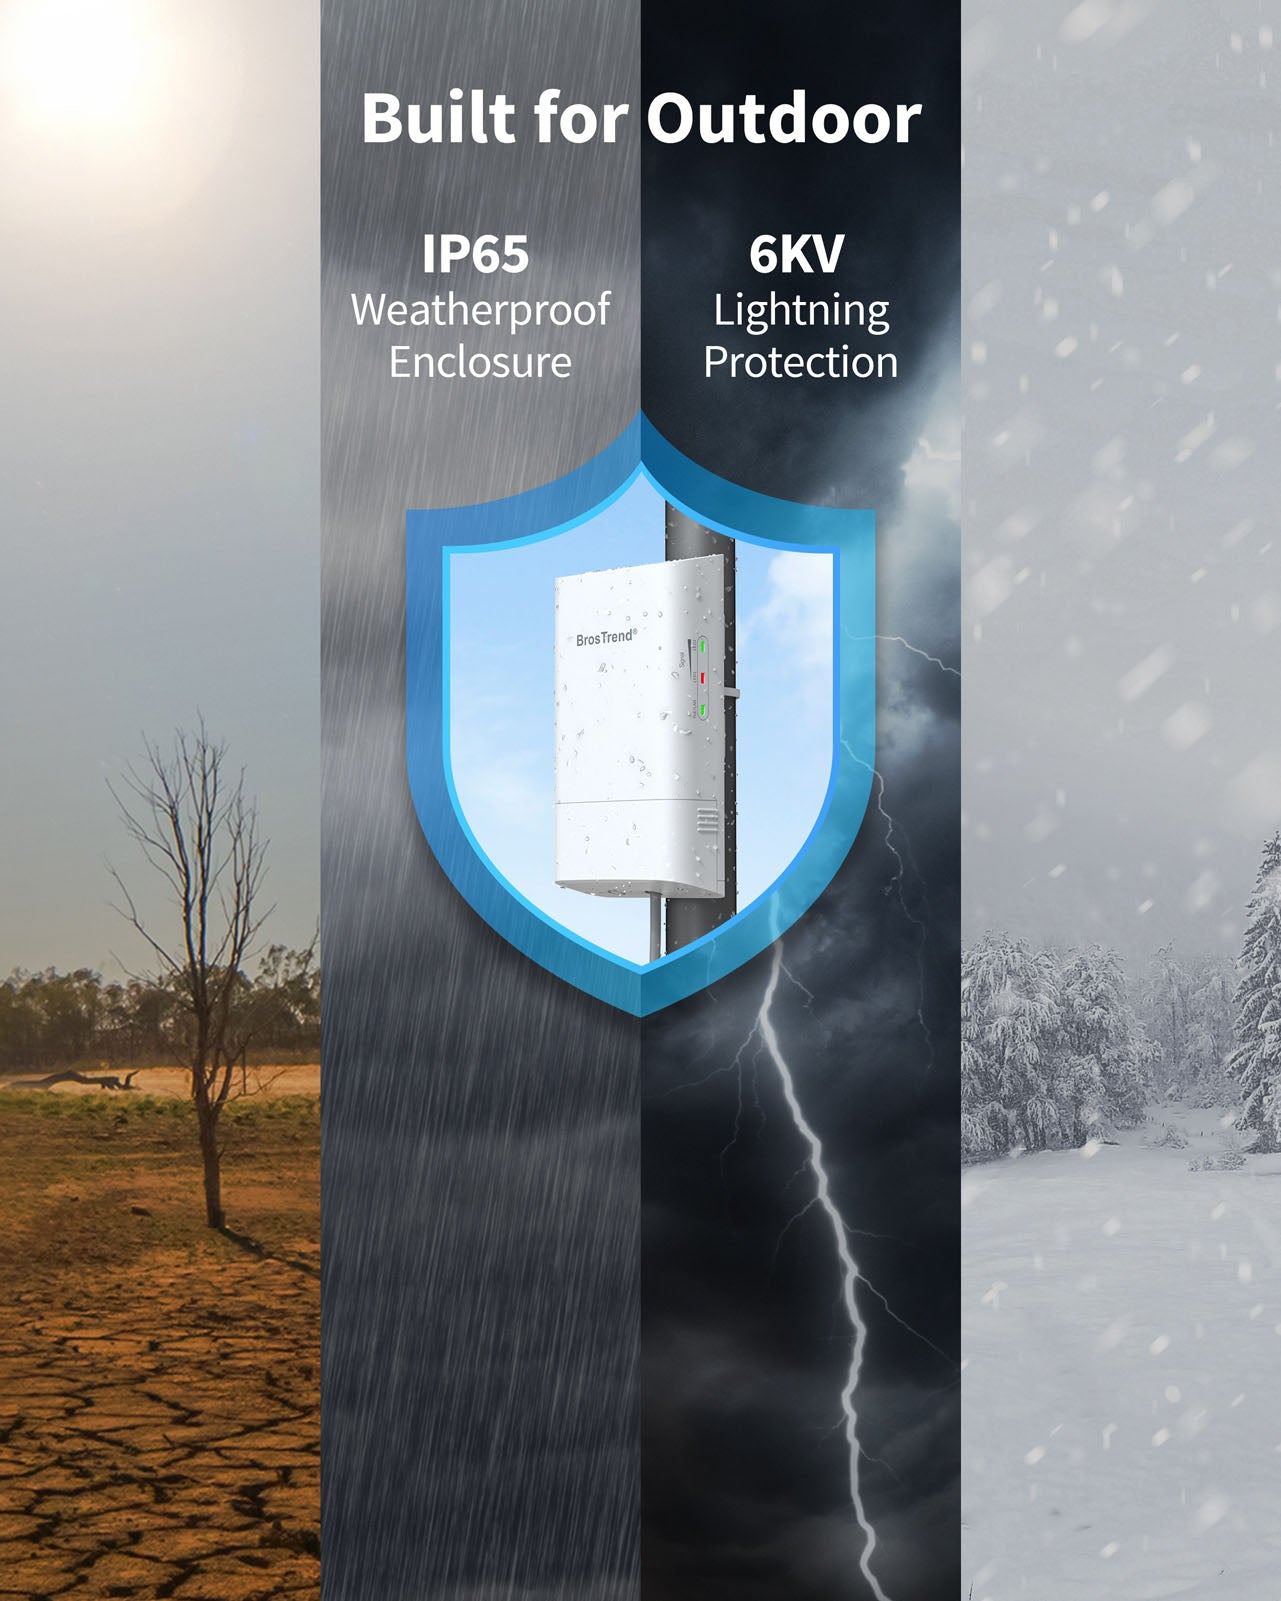 The WiFi Bridge Can Withstand All Weather Conditions with IP65 Weatherproof Resistance and 6KV Lightning Protection Built for Reliable and Durable Outdoor Use Whether It's Rain Snow or Extreme Temperatures